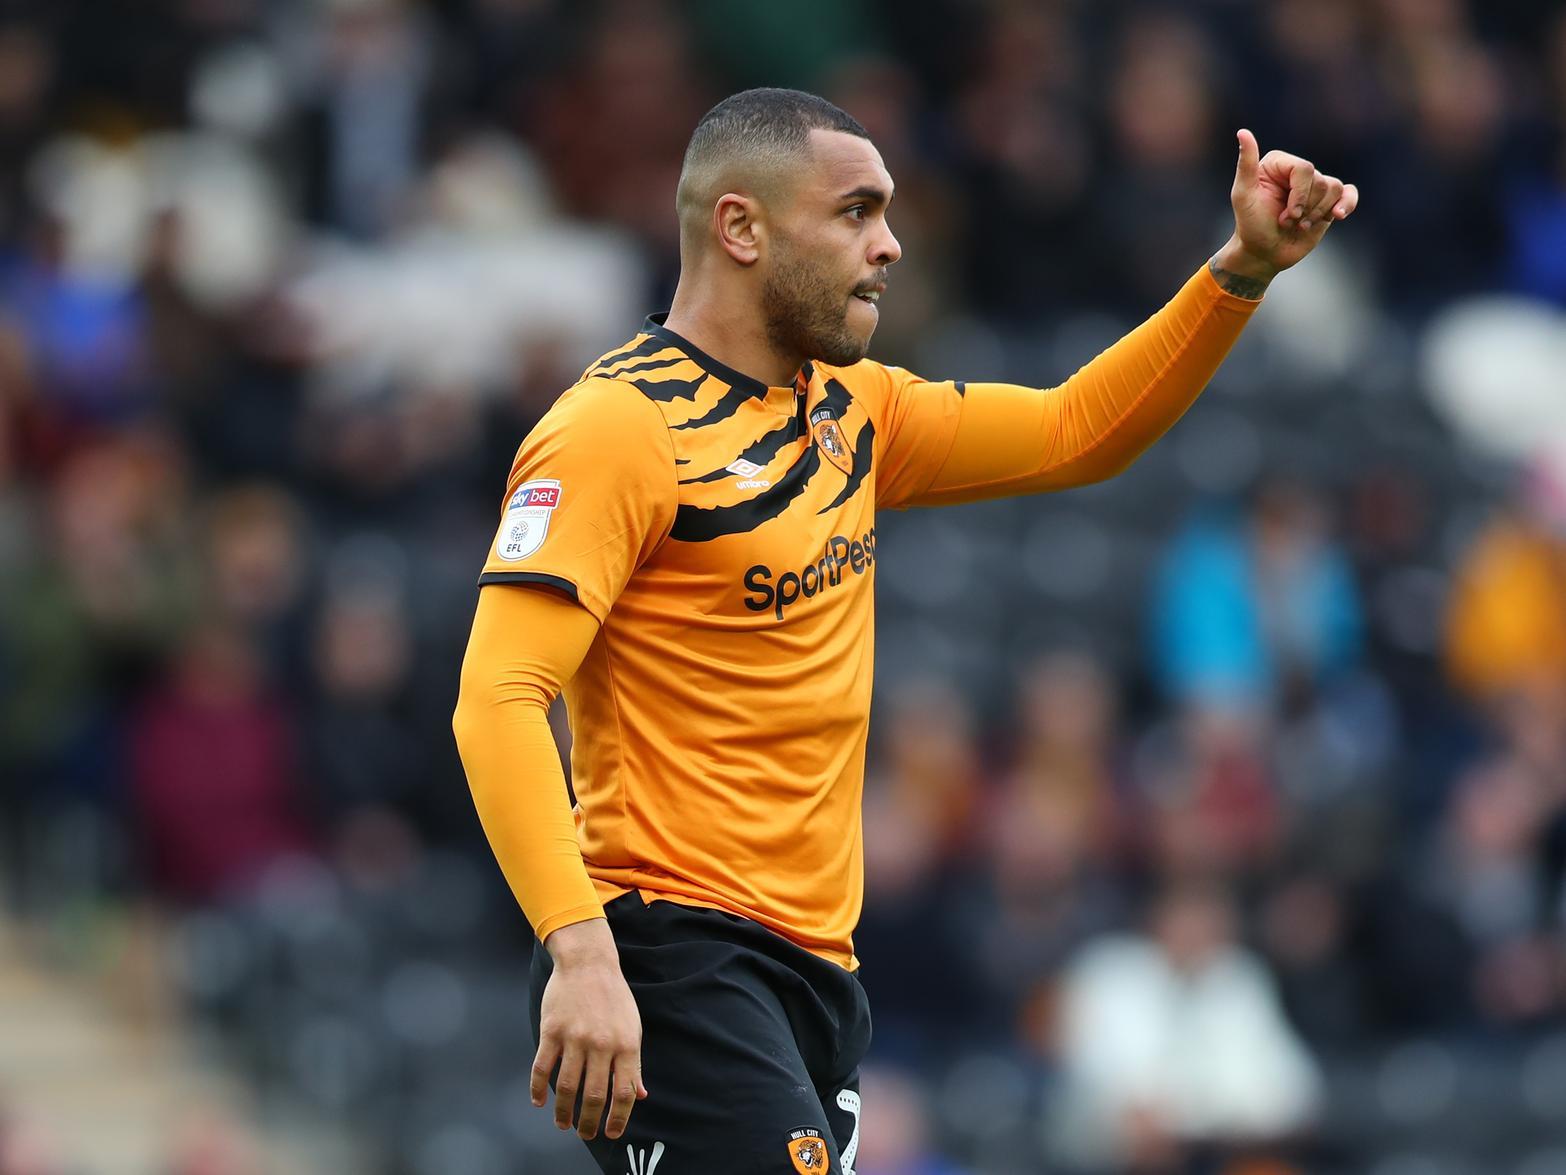 Who's that tearing through the skies? Why, it's Hull City's Josh Magennis! He won 12 aerialchallenges against Barnsley, but his dominance in the air wasn't enough to get his side a goal.